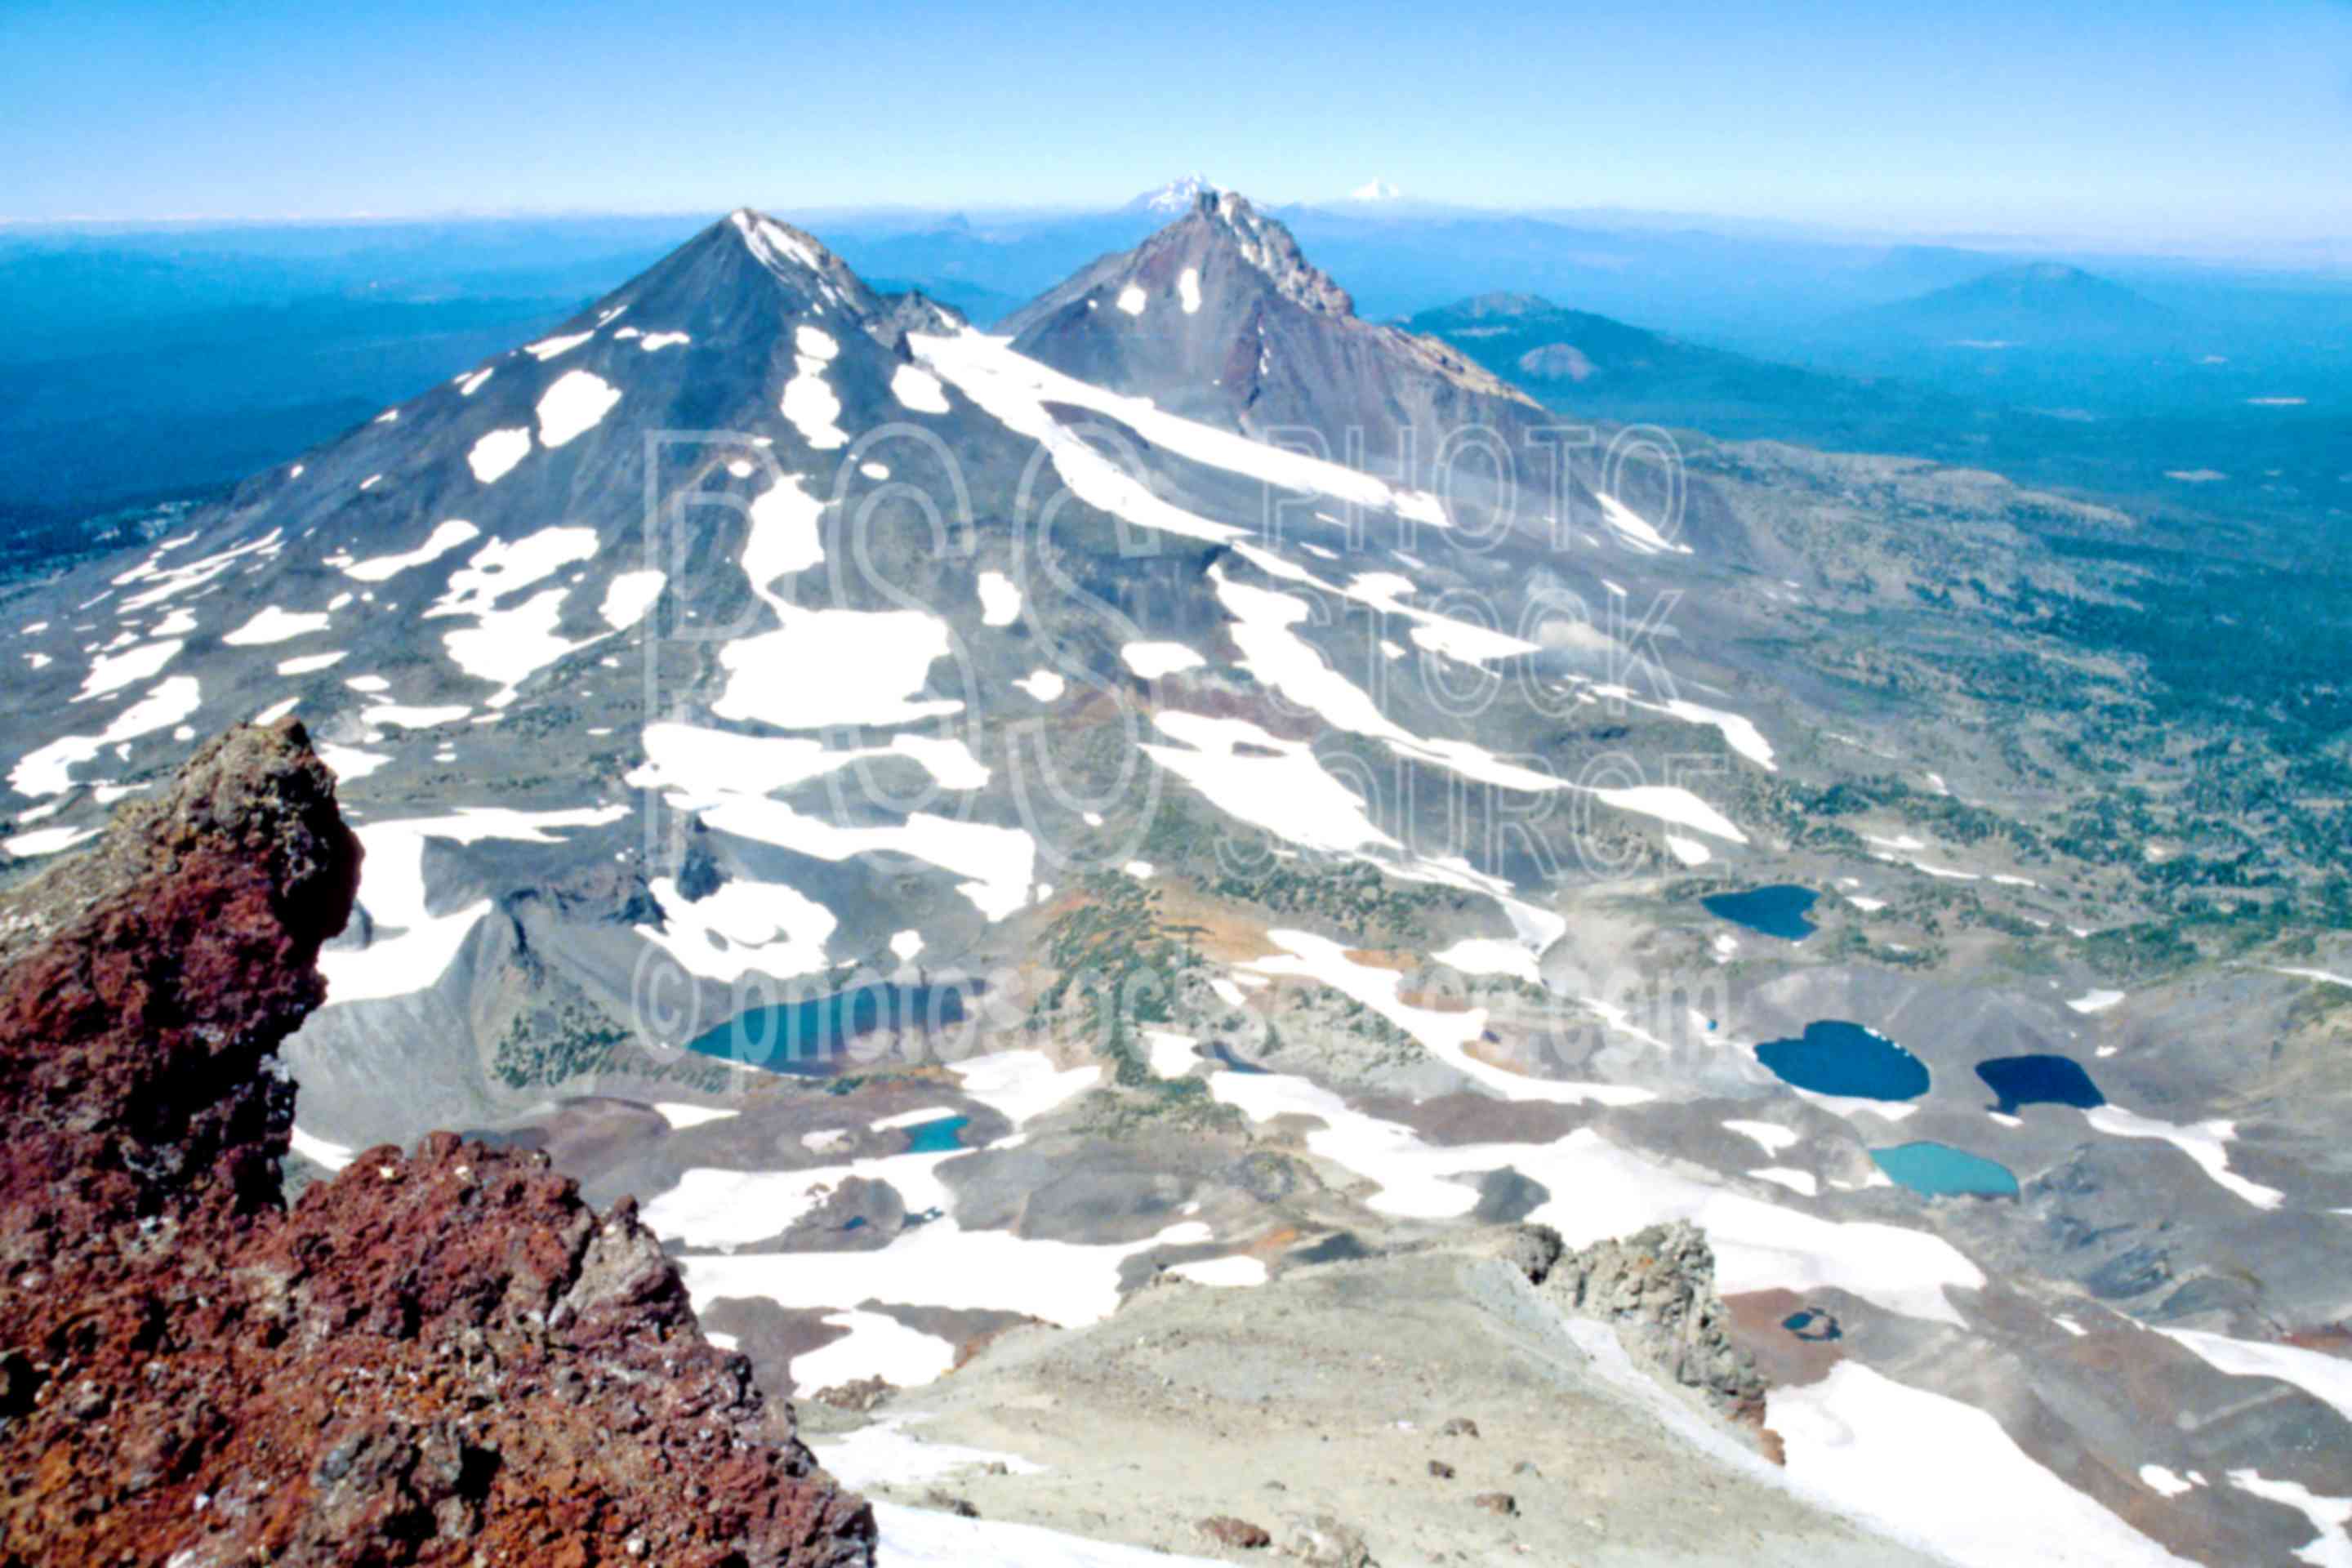 Middle and North Sister,middle sister,north sister,three fingered jack,mt. jefferson,mt. hood,mt. adams,south sister,summit,usas,mountains